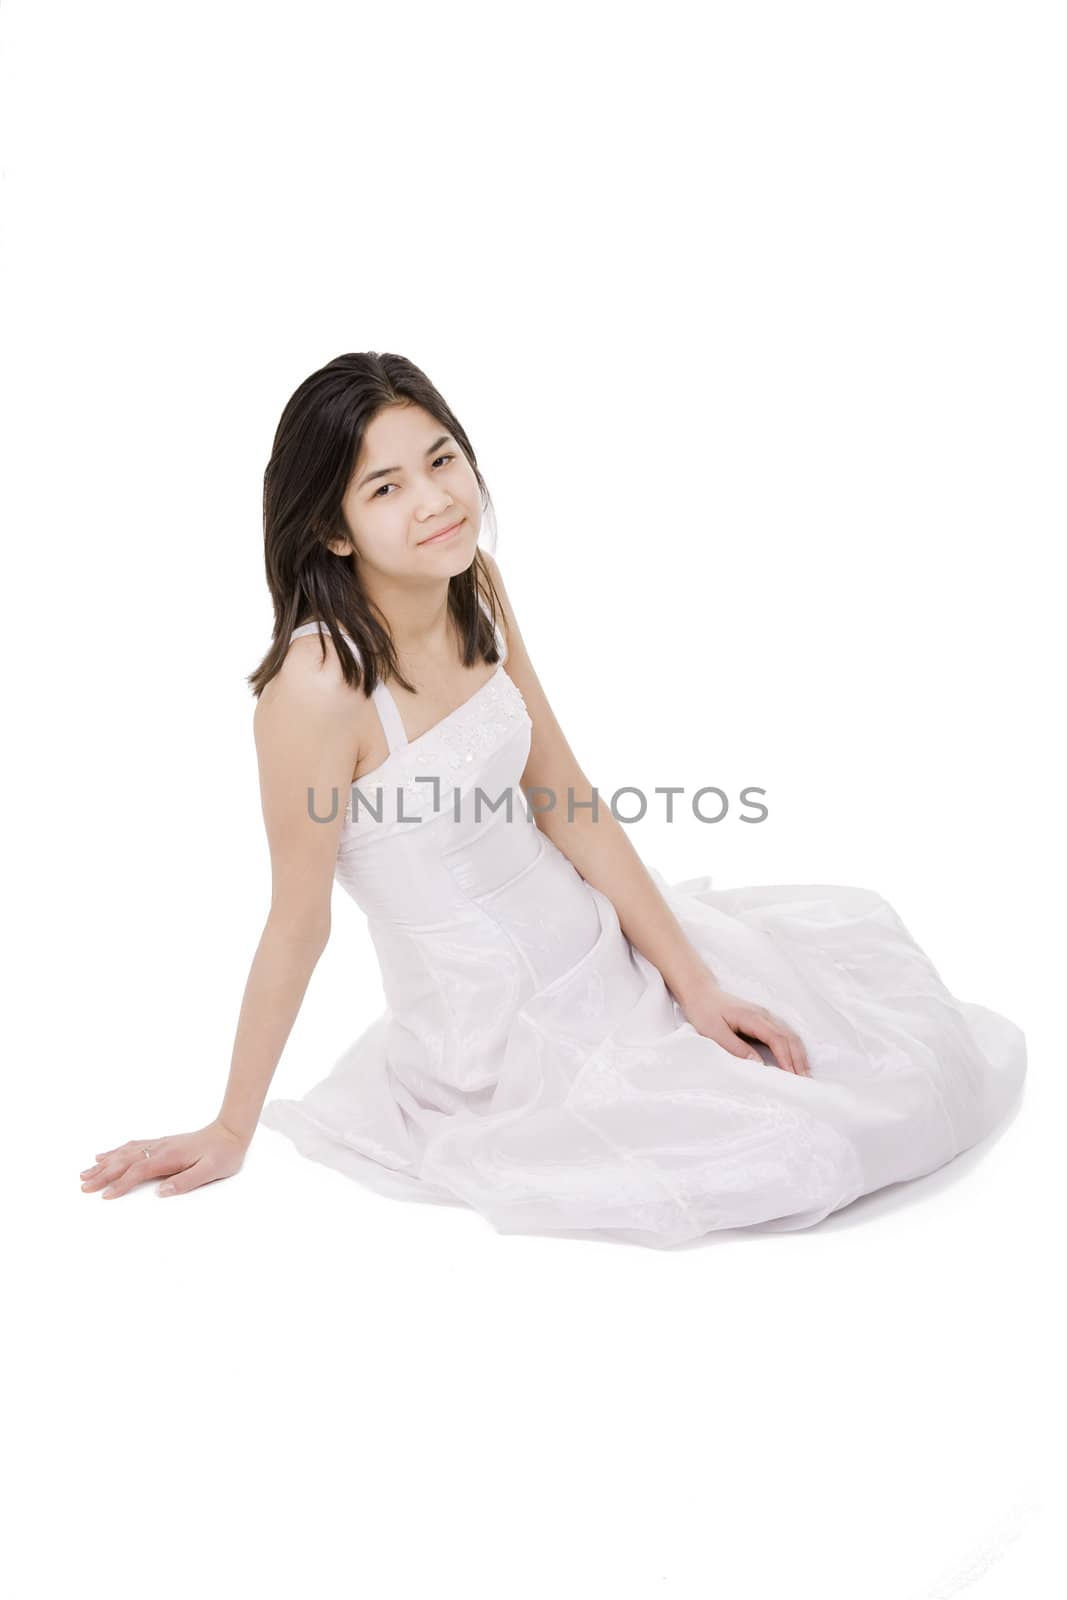 Beautiful young teen girl in white dress or gown sitting on floor, isolated on white